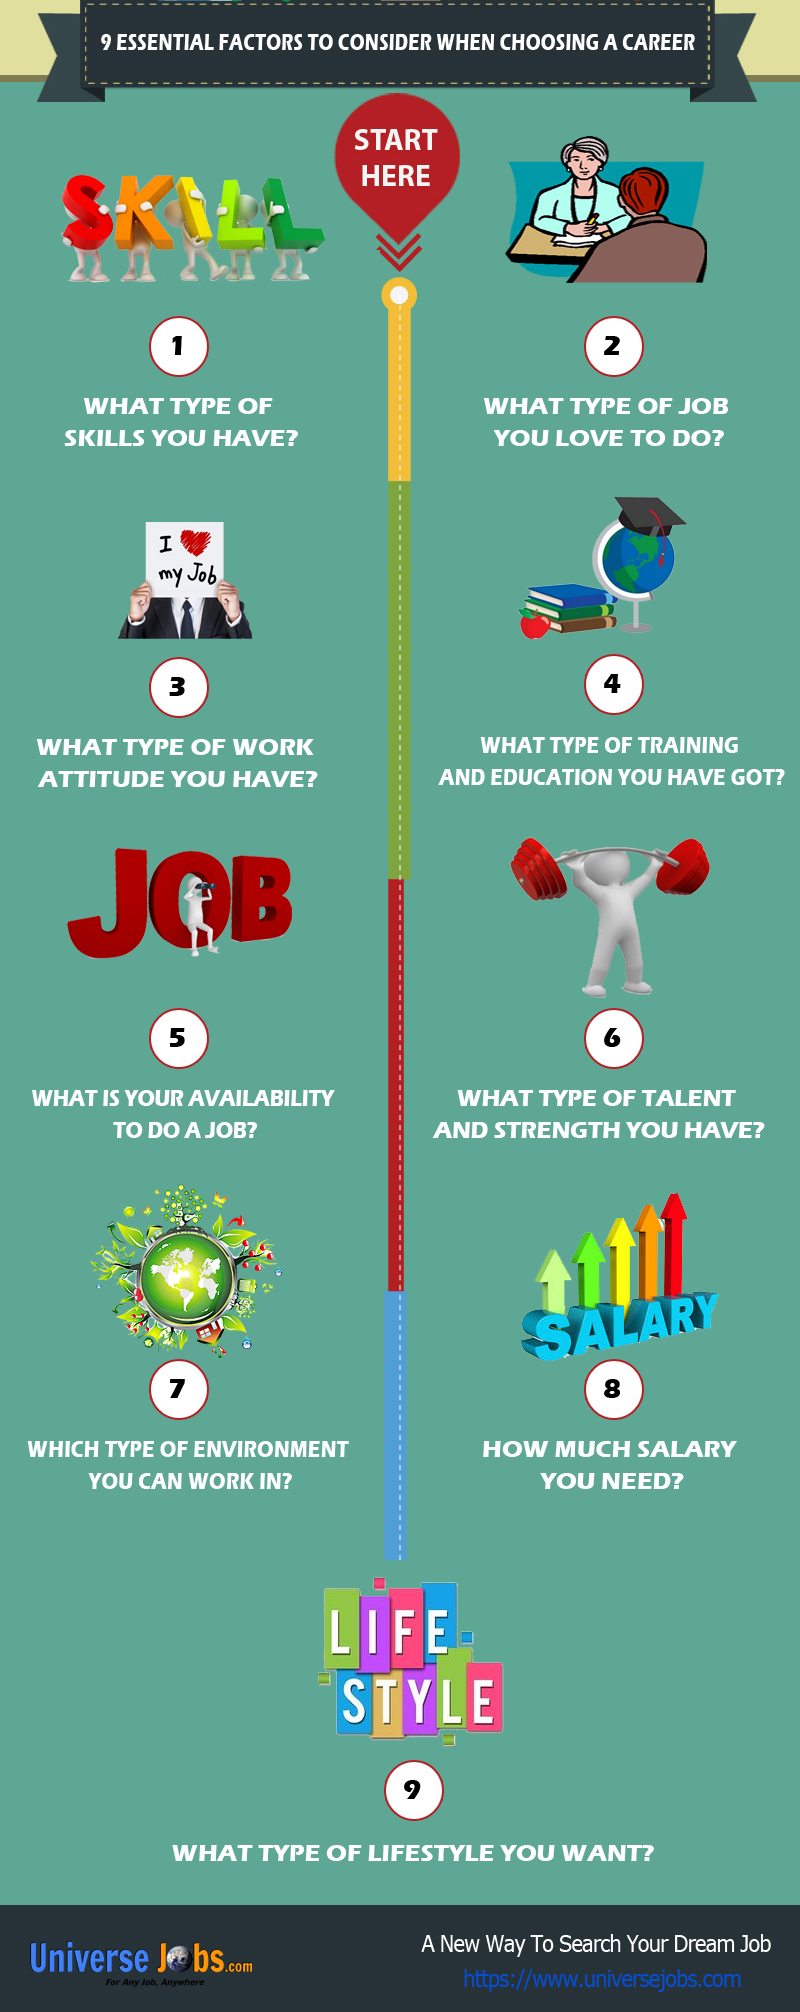 9 Important Factors To Consider When Choosing A Career Info Graphics